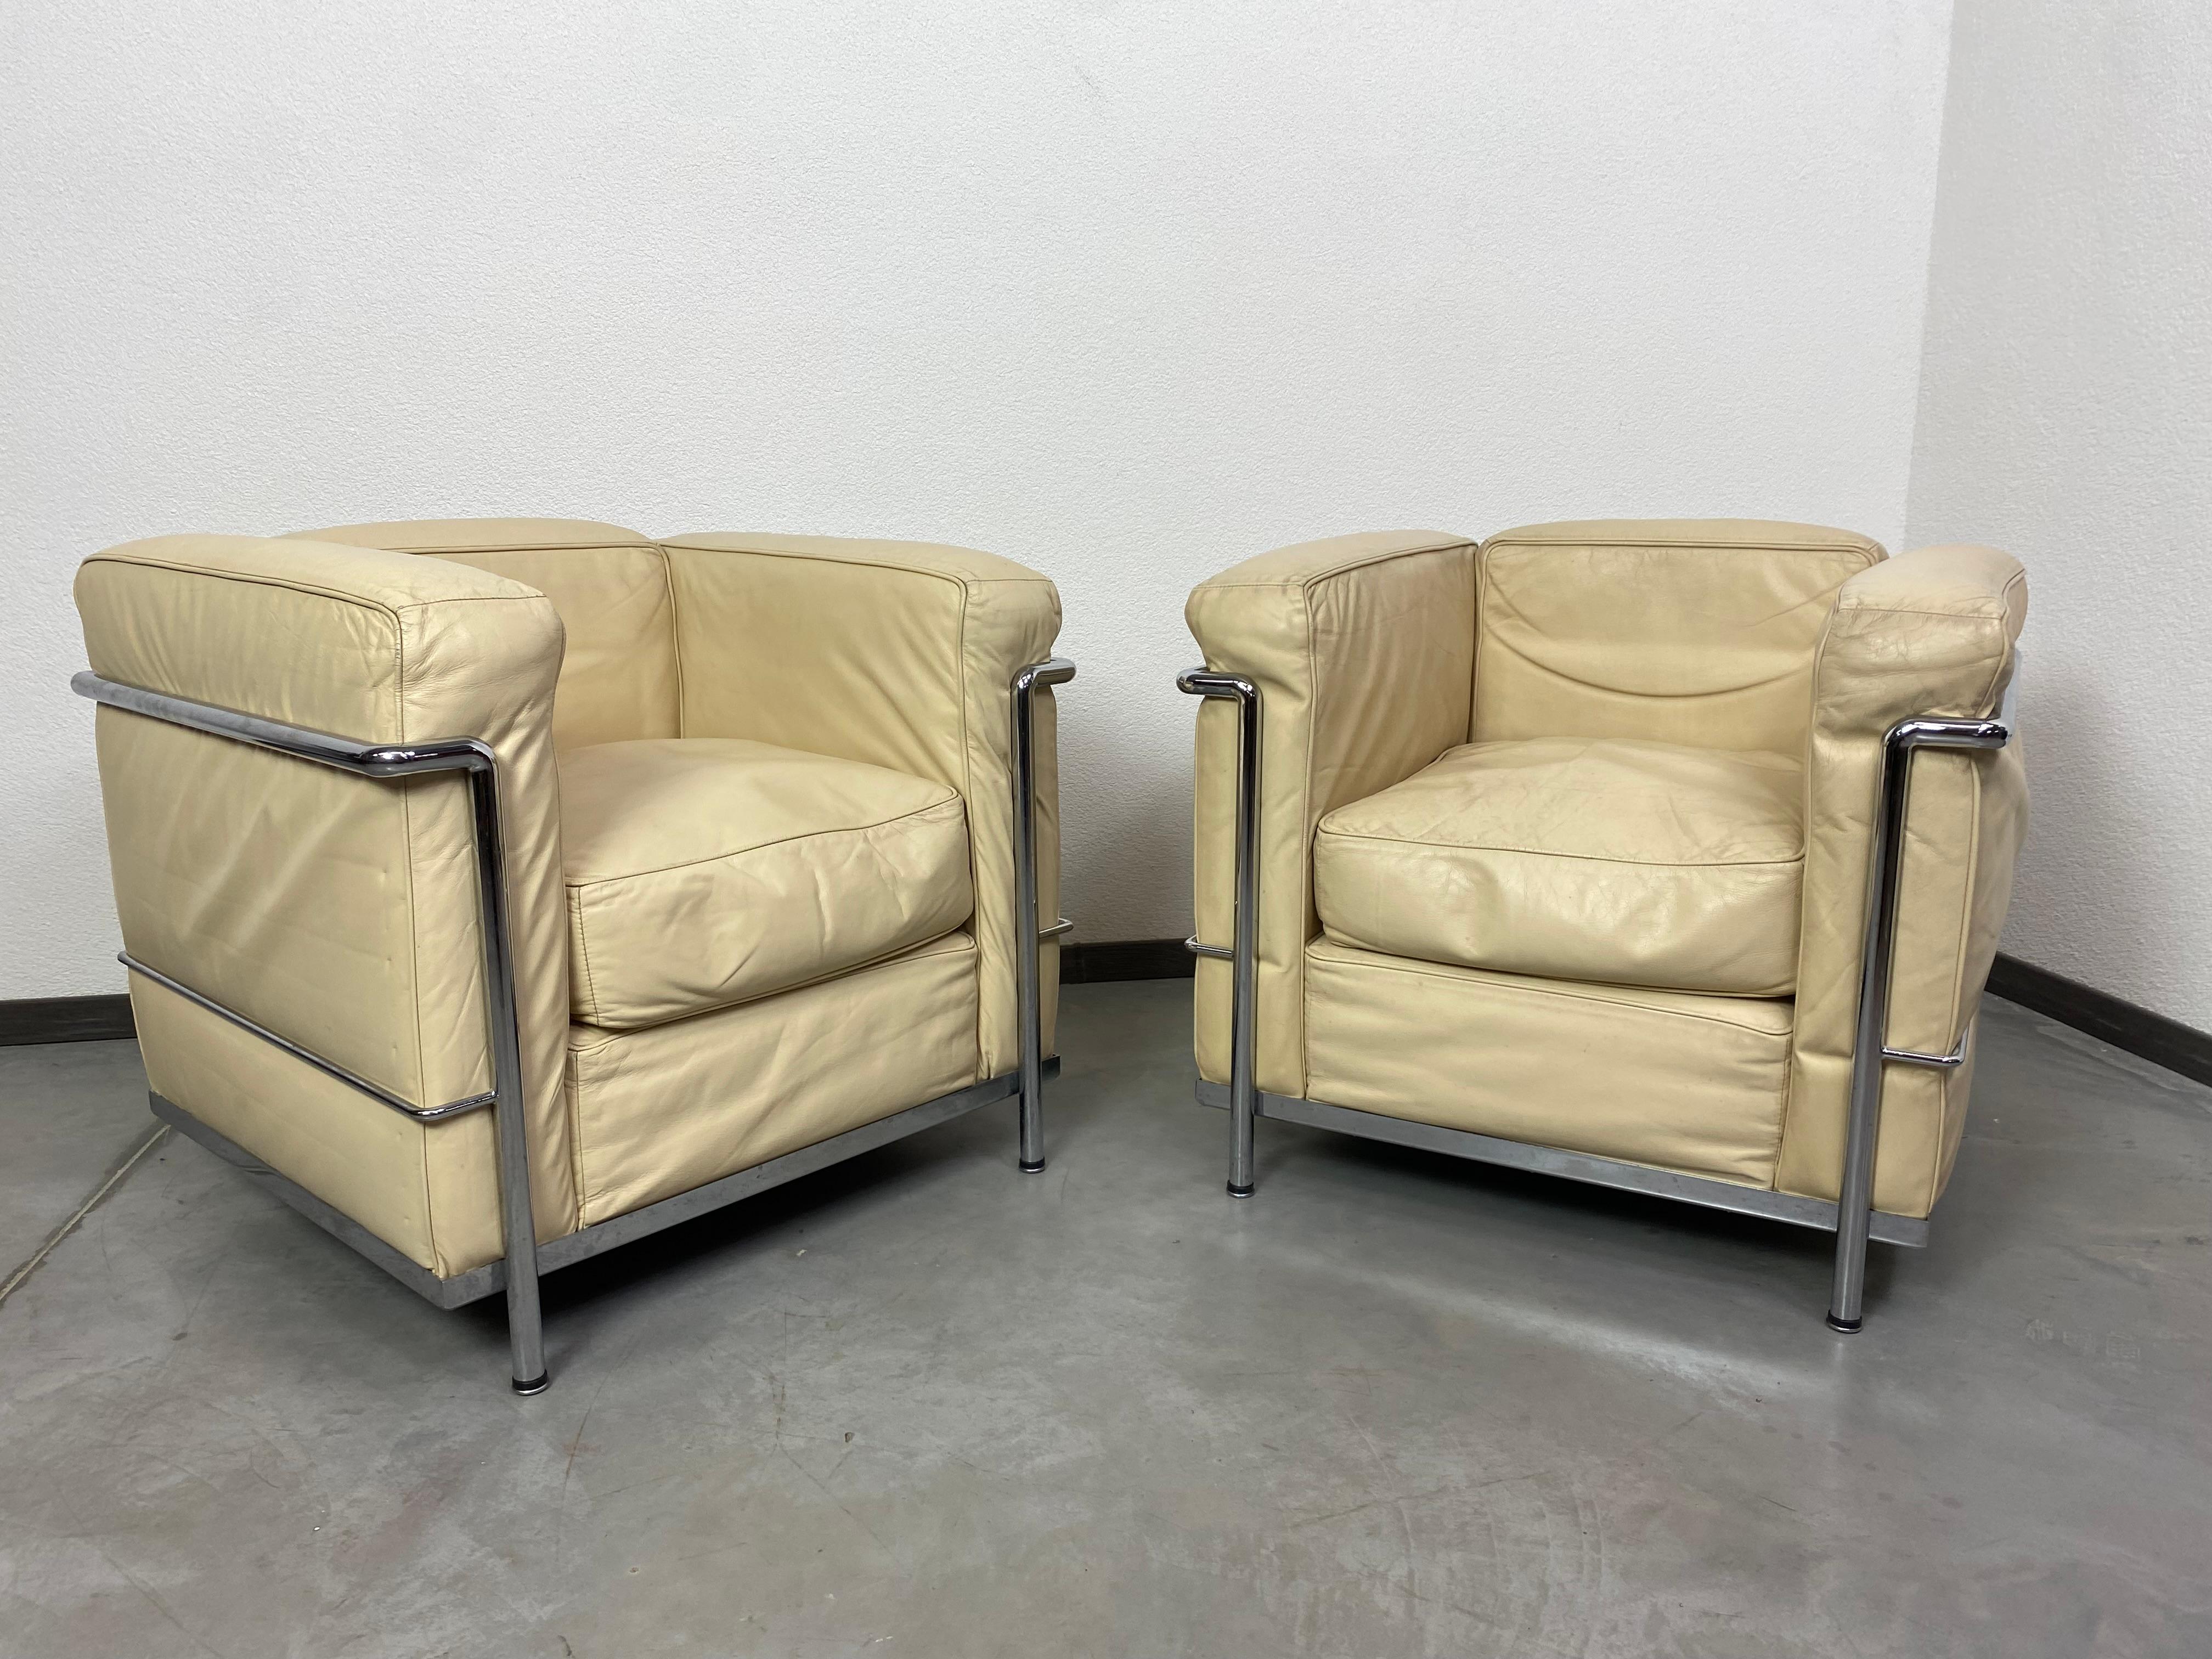 White leather club chairs LC2 were designed in 1928 by Le Corbusier and produced by Cassina in the 1970s. Very nice original condition with patina.